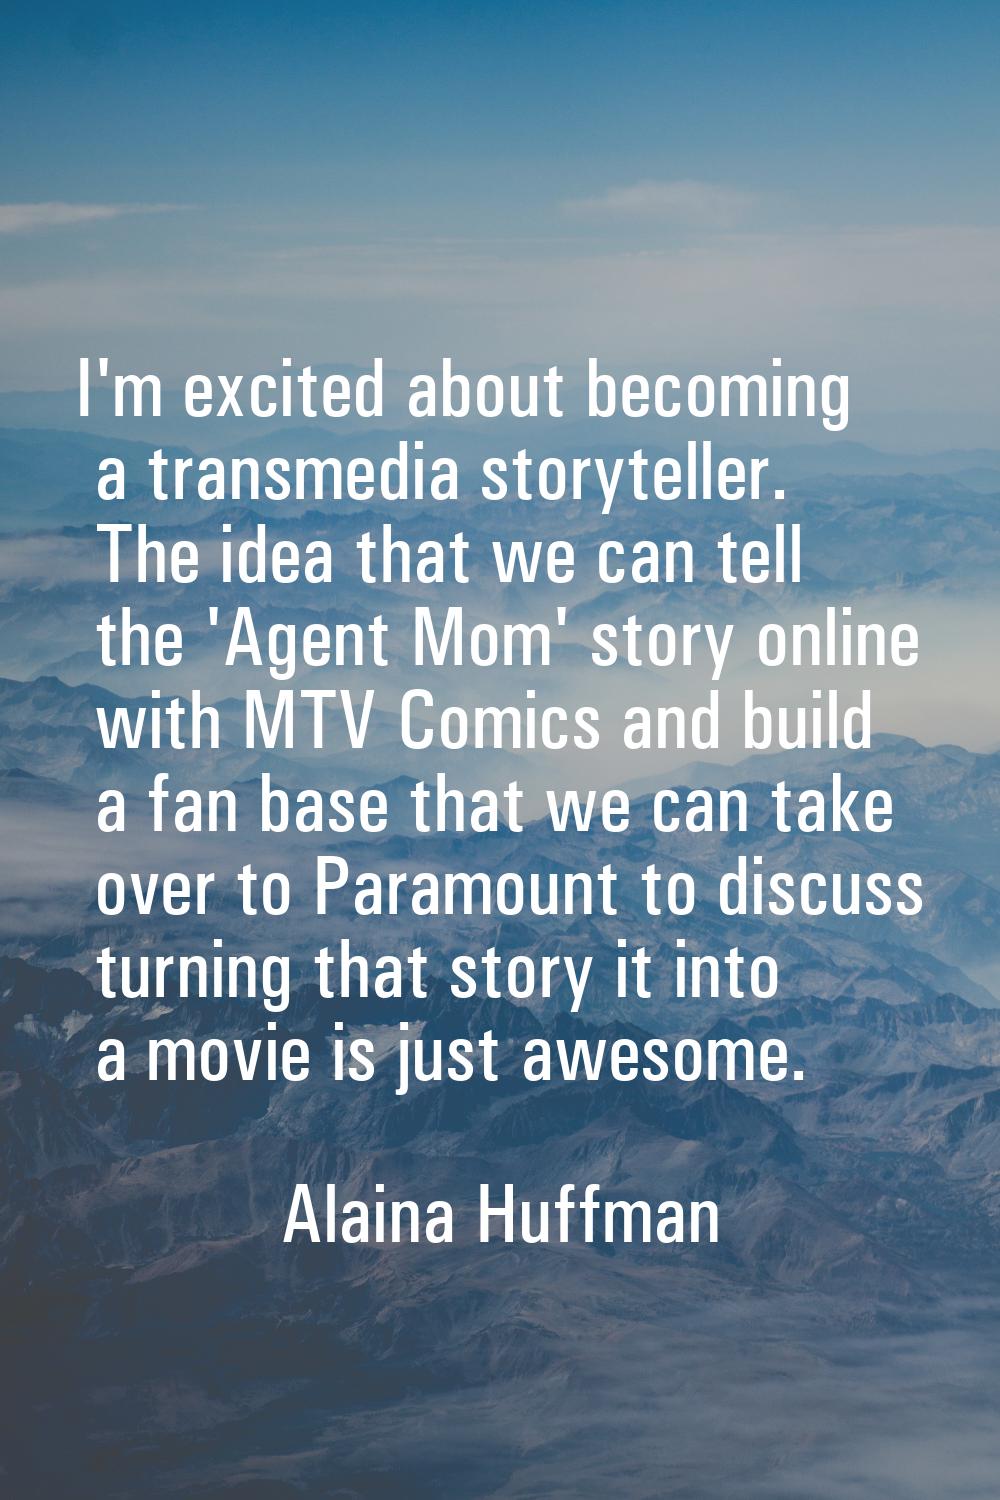 I'm excited about becoming a transmedia storyteller. The idea that we can tell the 'Agent Mom' stor